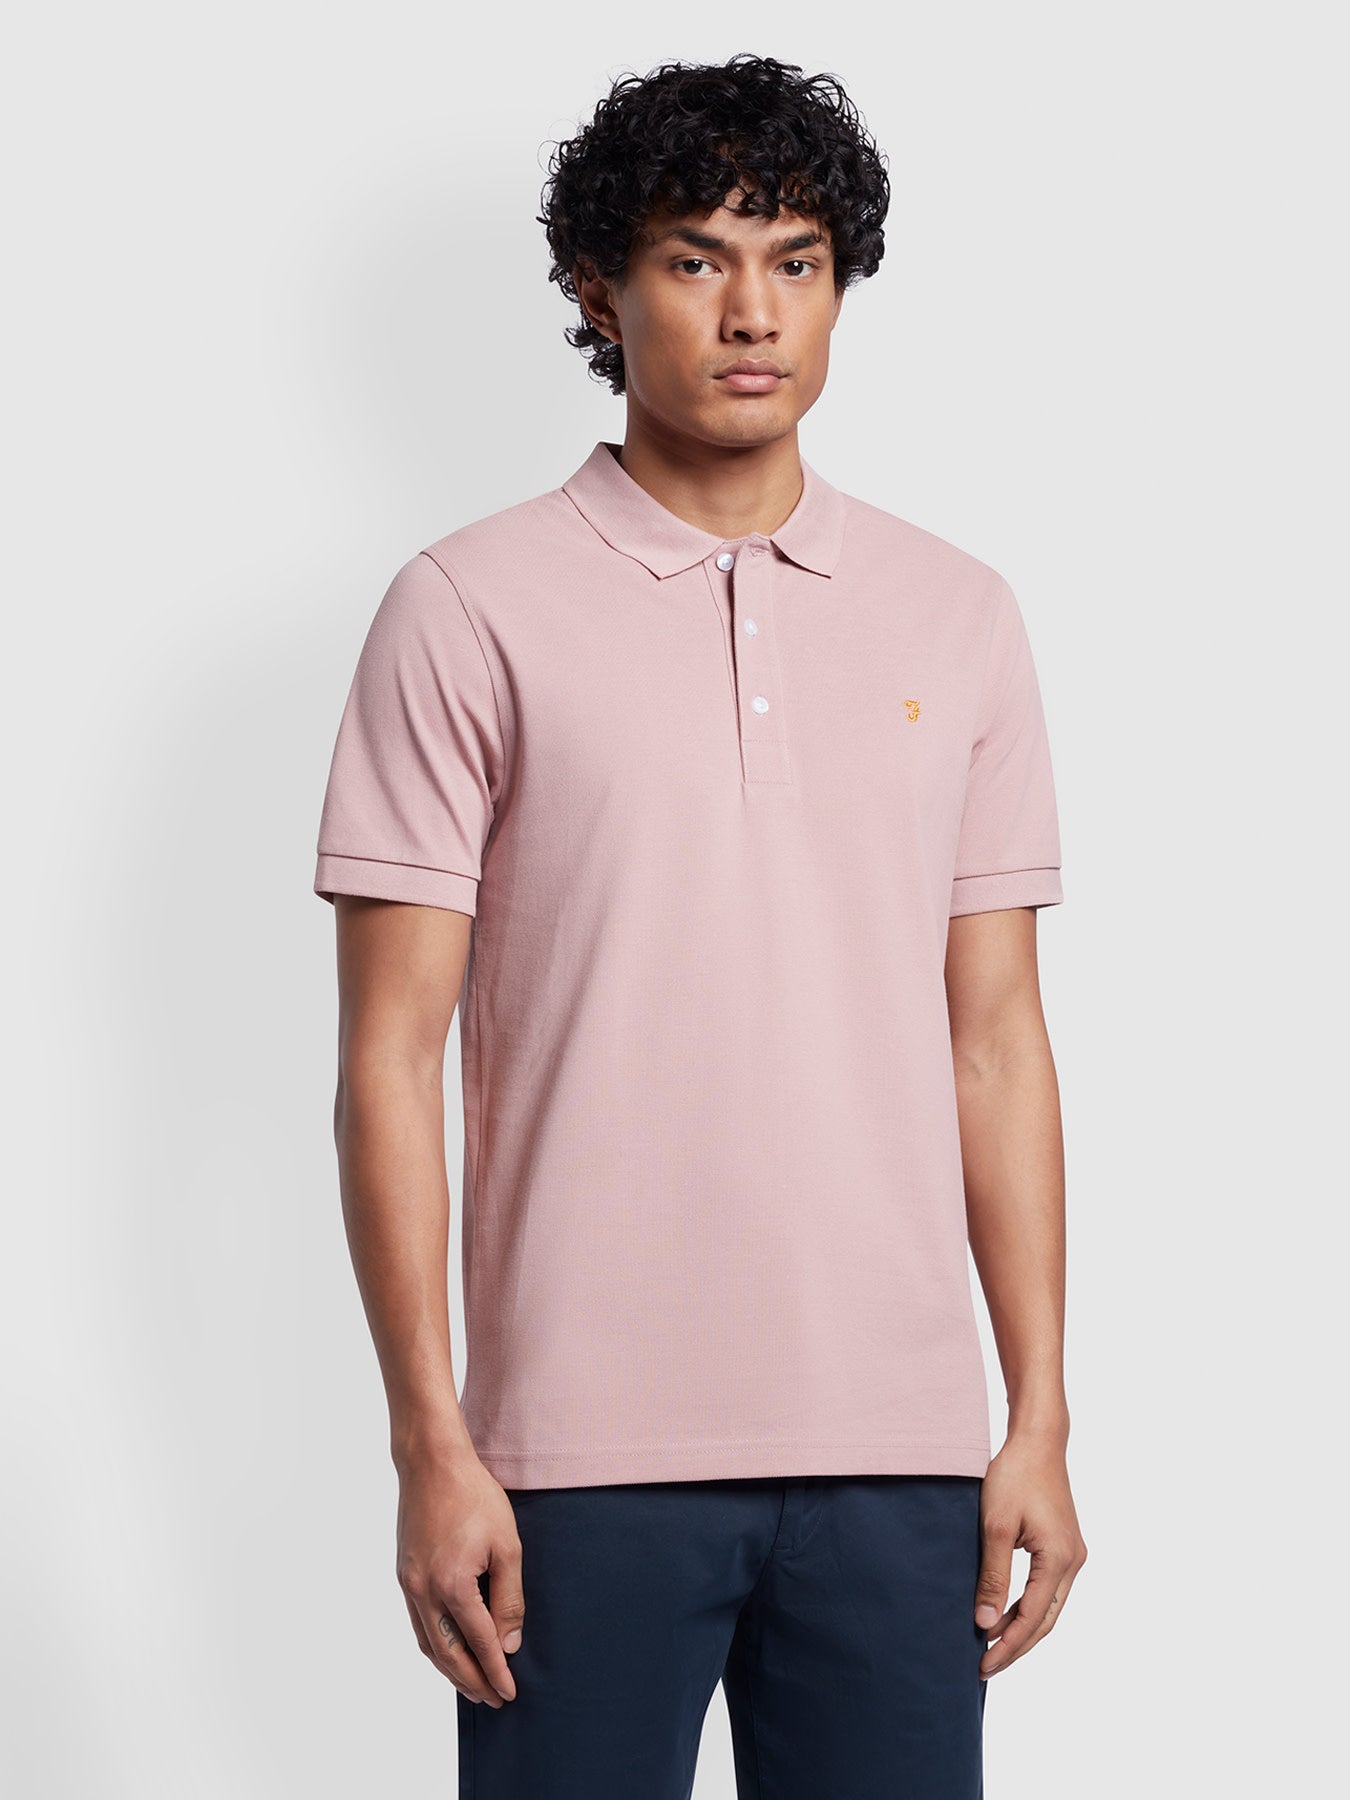 View Blanes Slim Fit Short Sleeve Polo Shirt In Dark Pink information